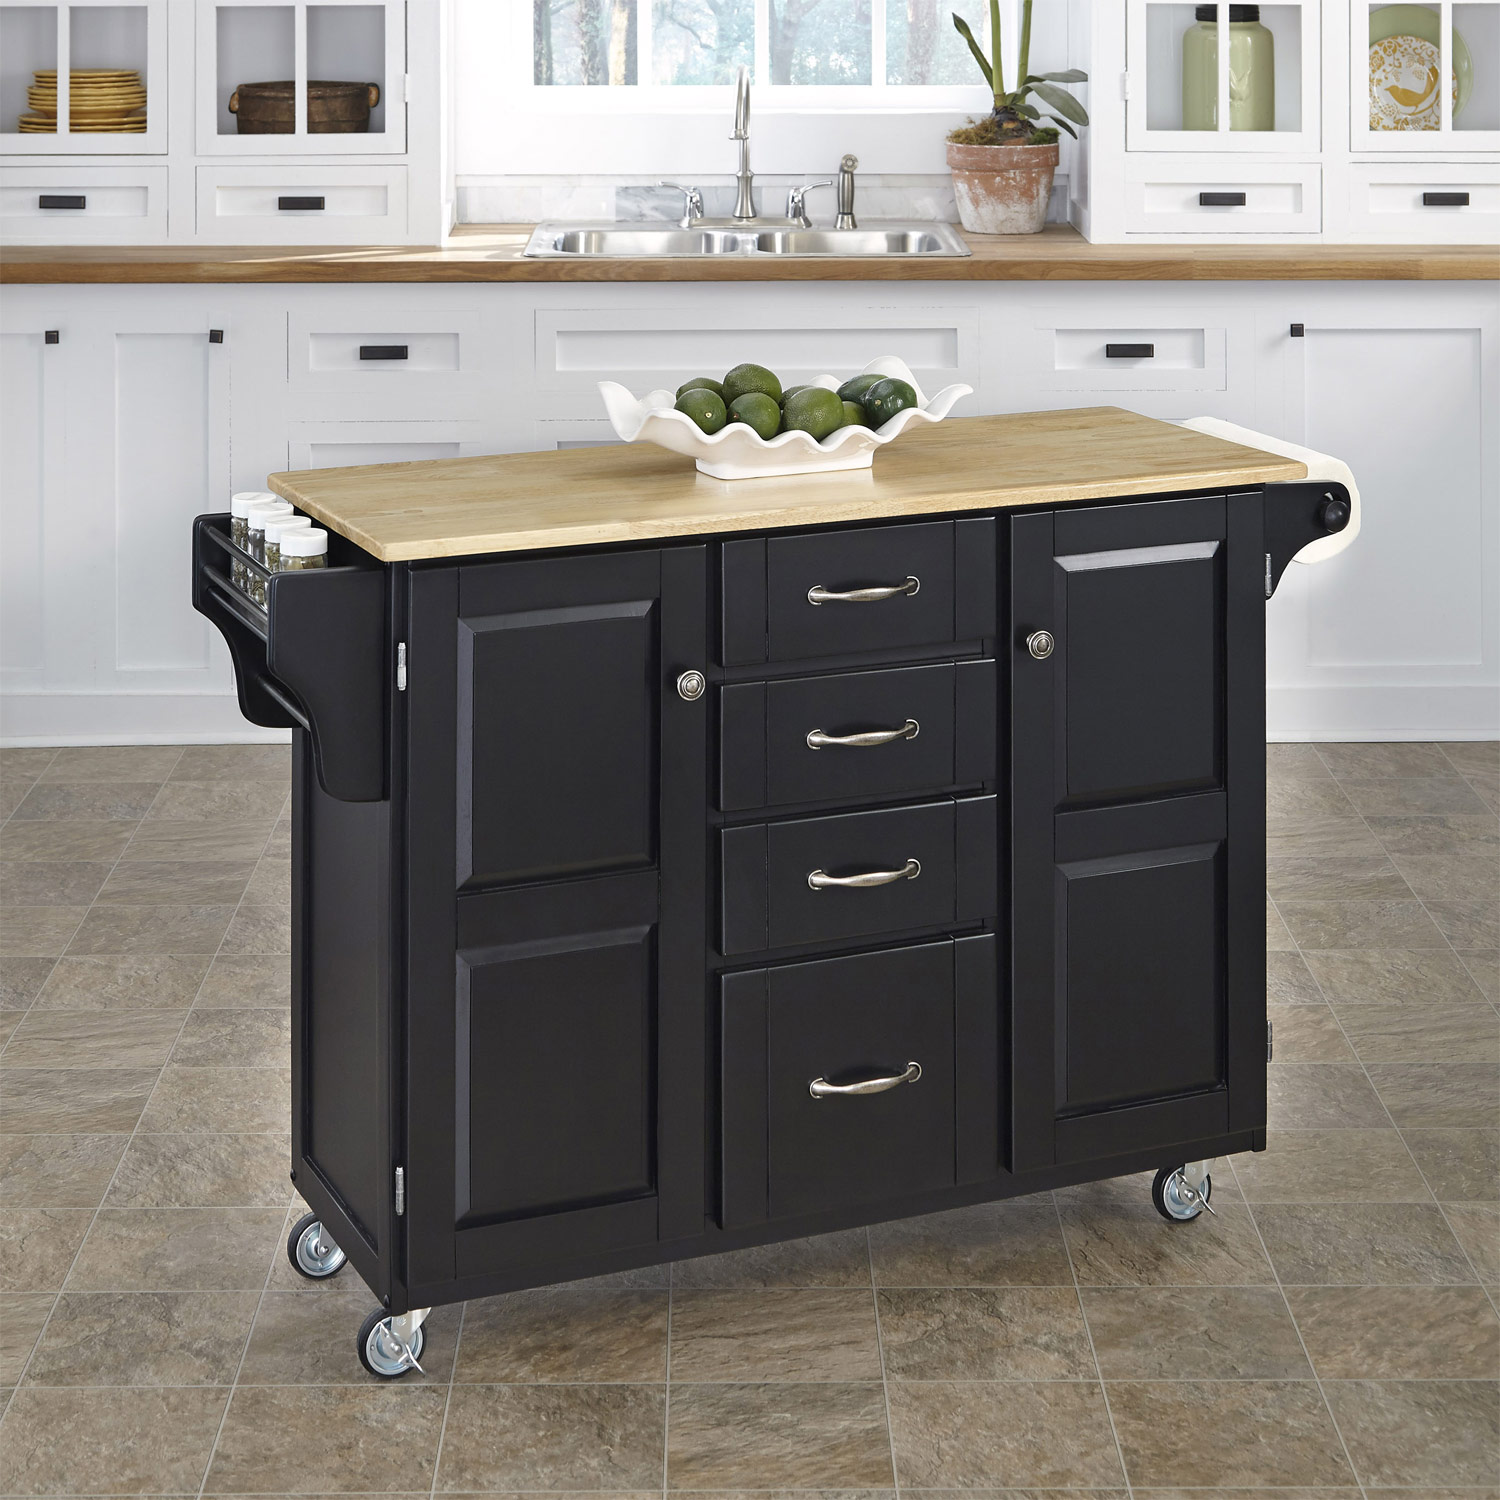 Home Styles Create-A-Cart with Wood Top - Black